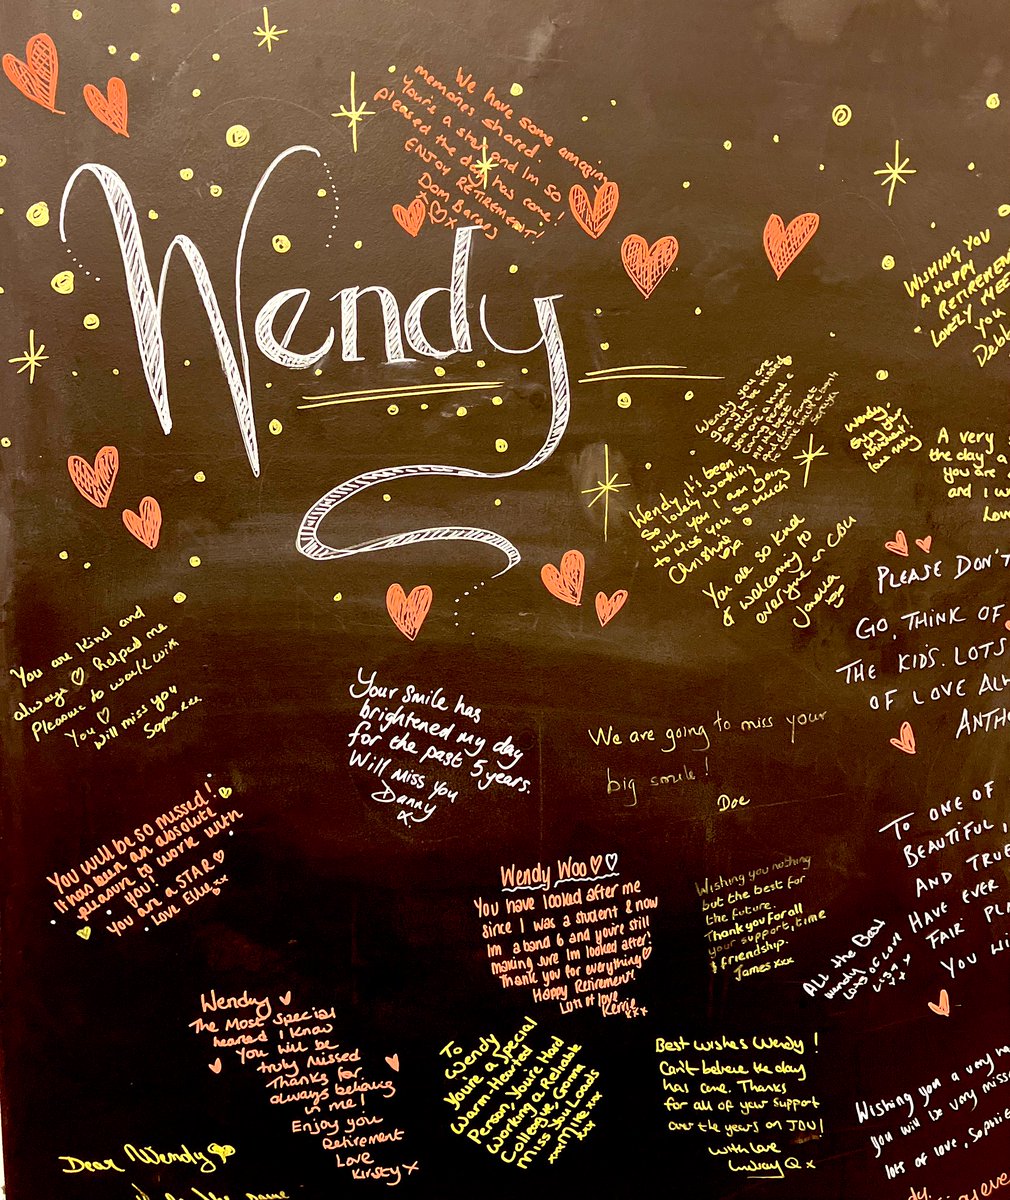 At CBU we said adieu 🥹…Happy retirement to our beautiful colleague Wendy today. Thank you Wendy for all your years of dedicated service, kindness and compassion 💕💕💕 @AndersonJanella @maryabberton @jdurkintc @hilts @GMMH_NHS @AdamC_NHS @stephenkaar @helenmurt @KatieHulmesRMN